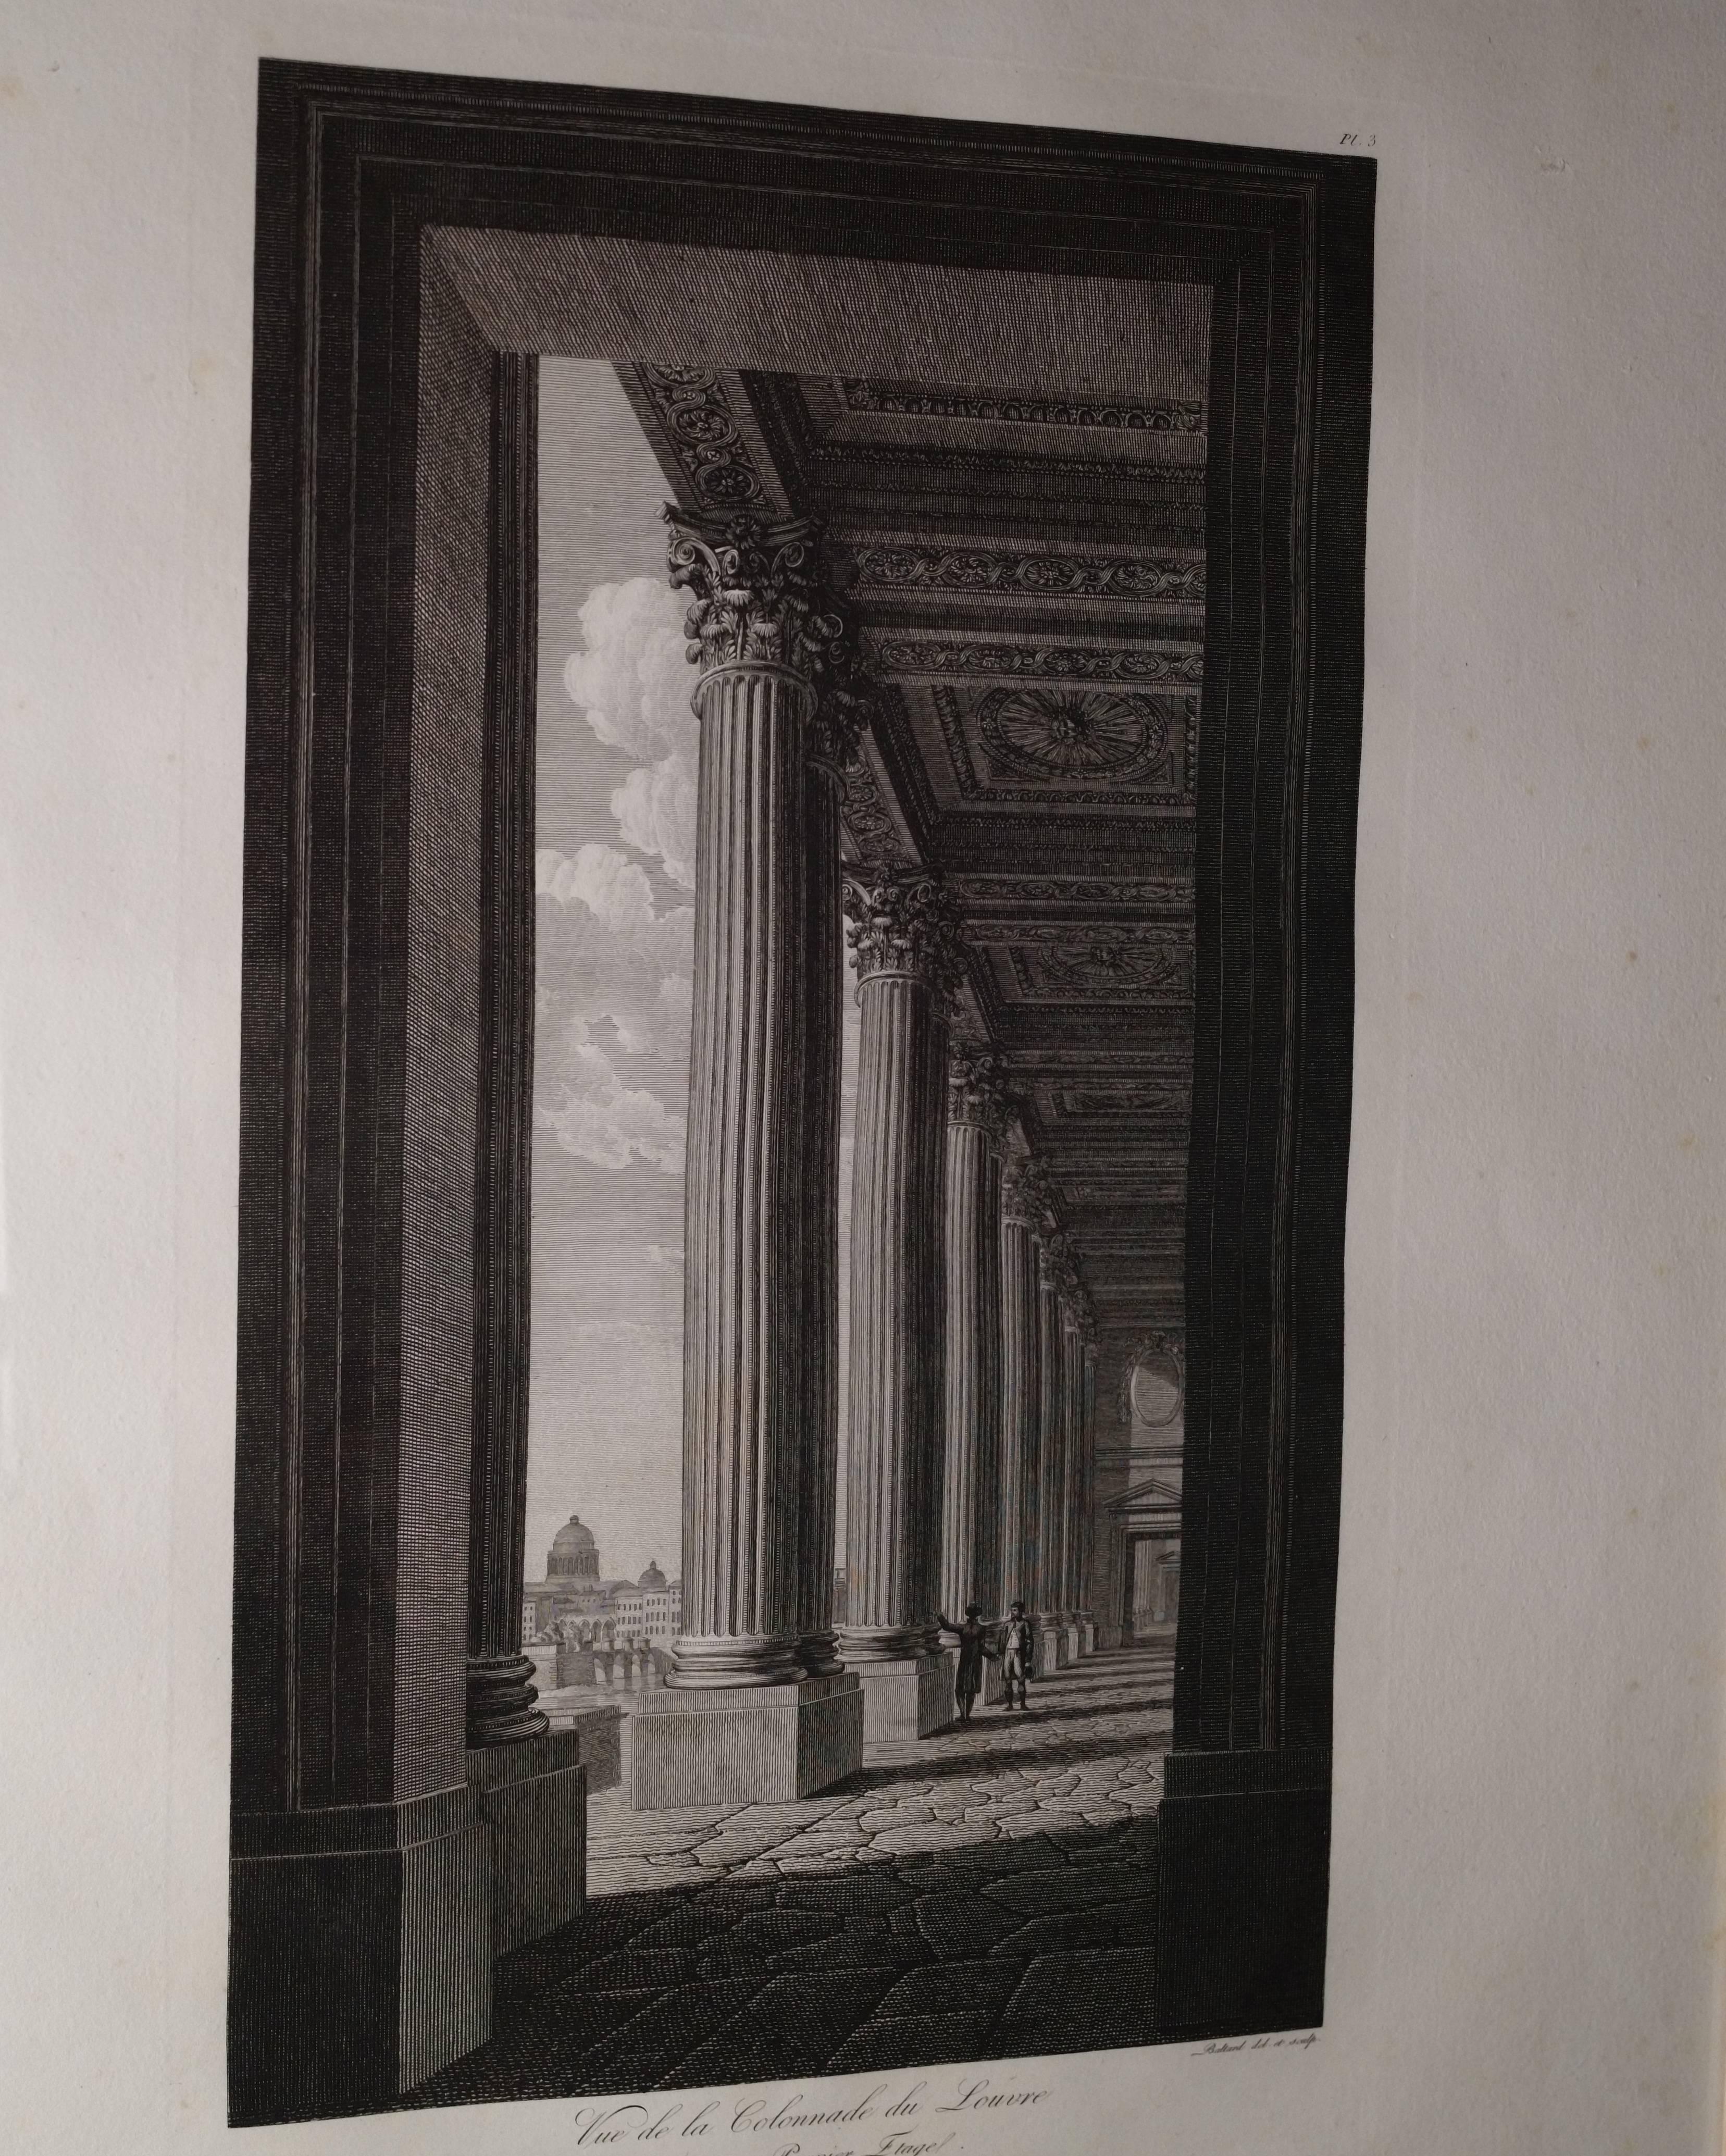 Early 19th Century Set of 9 Engravings, Views Palace of Le Louvre Paris, circa 1805 by Balard. For Sale